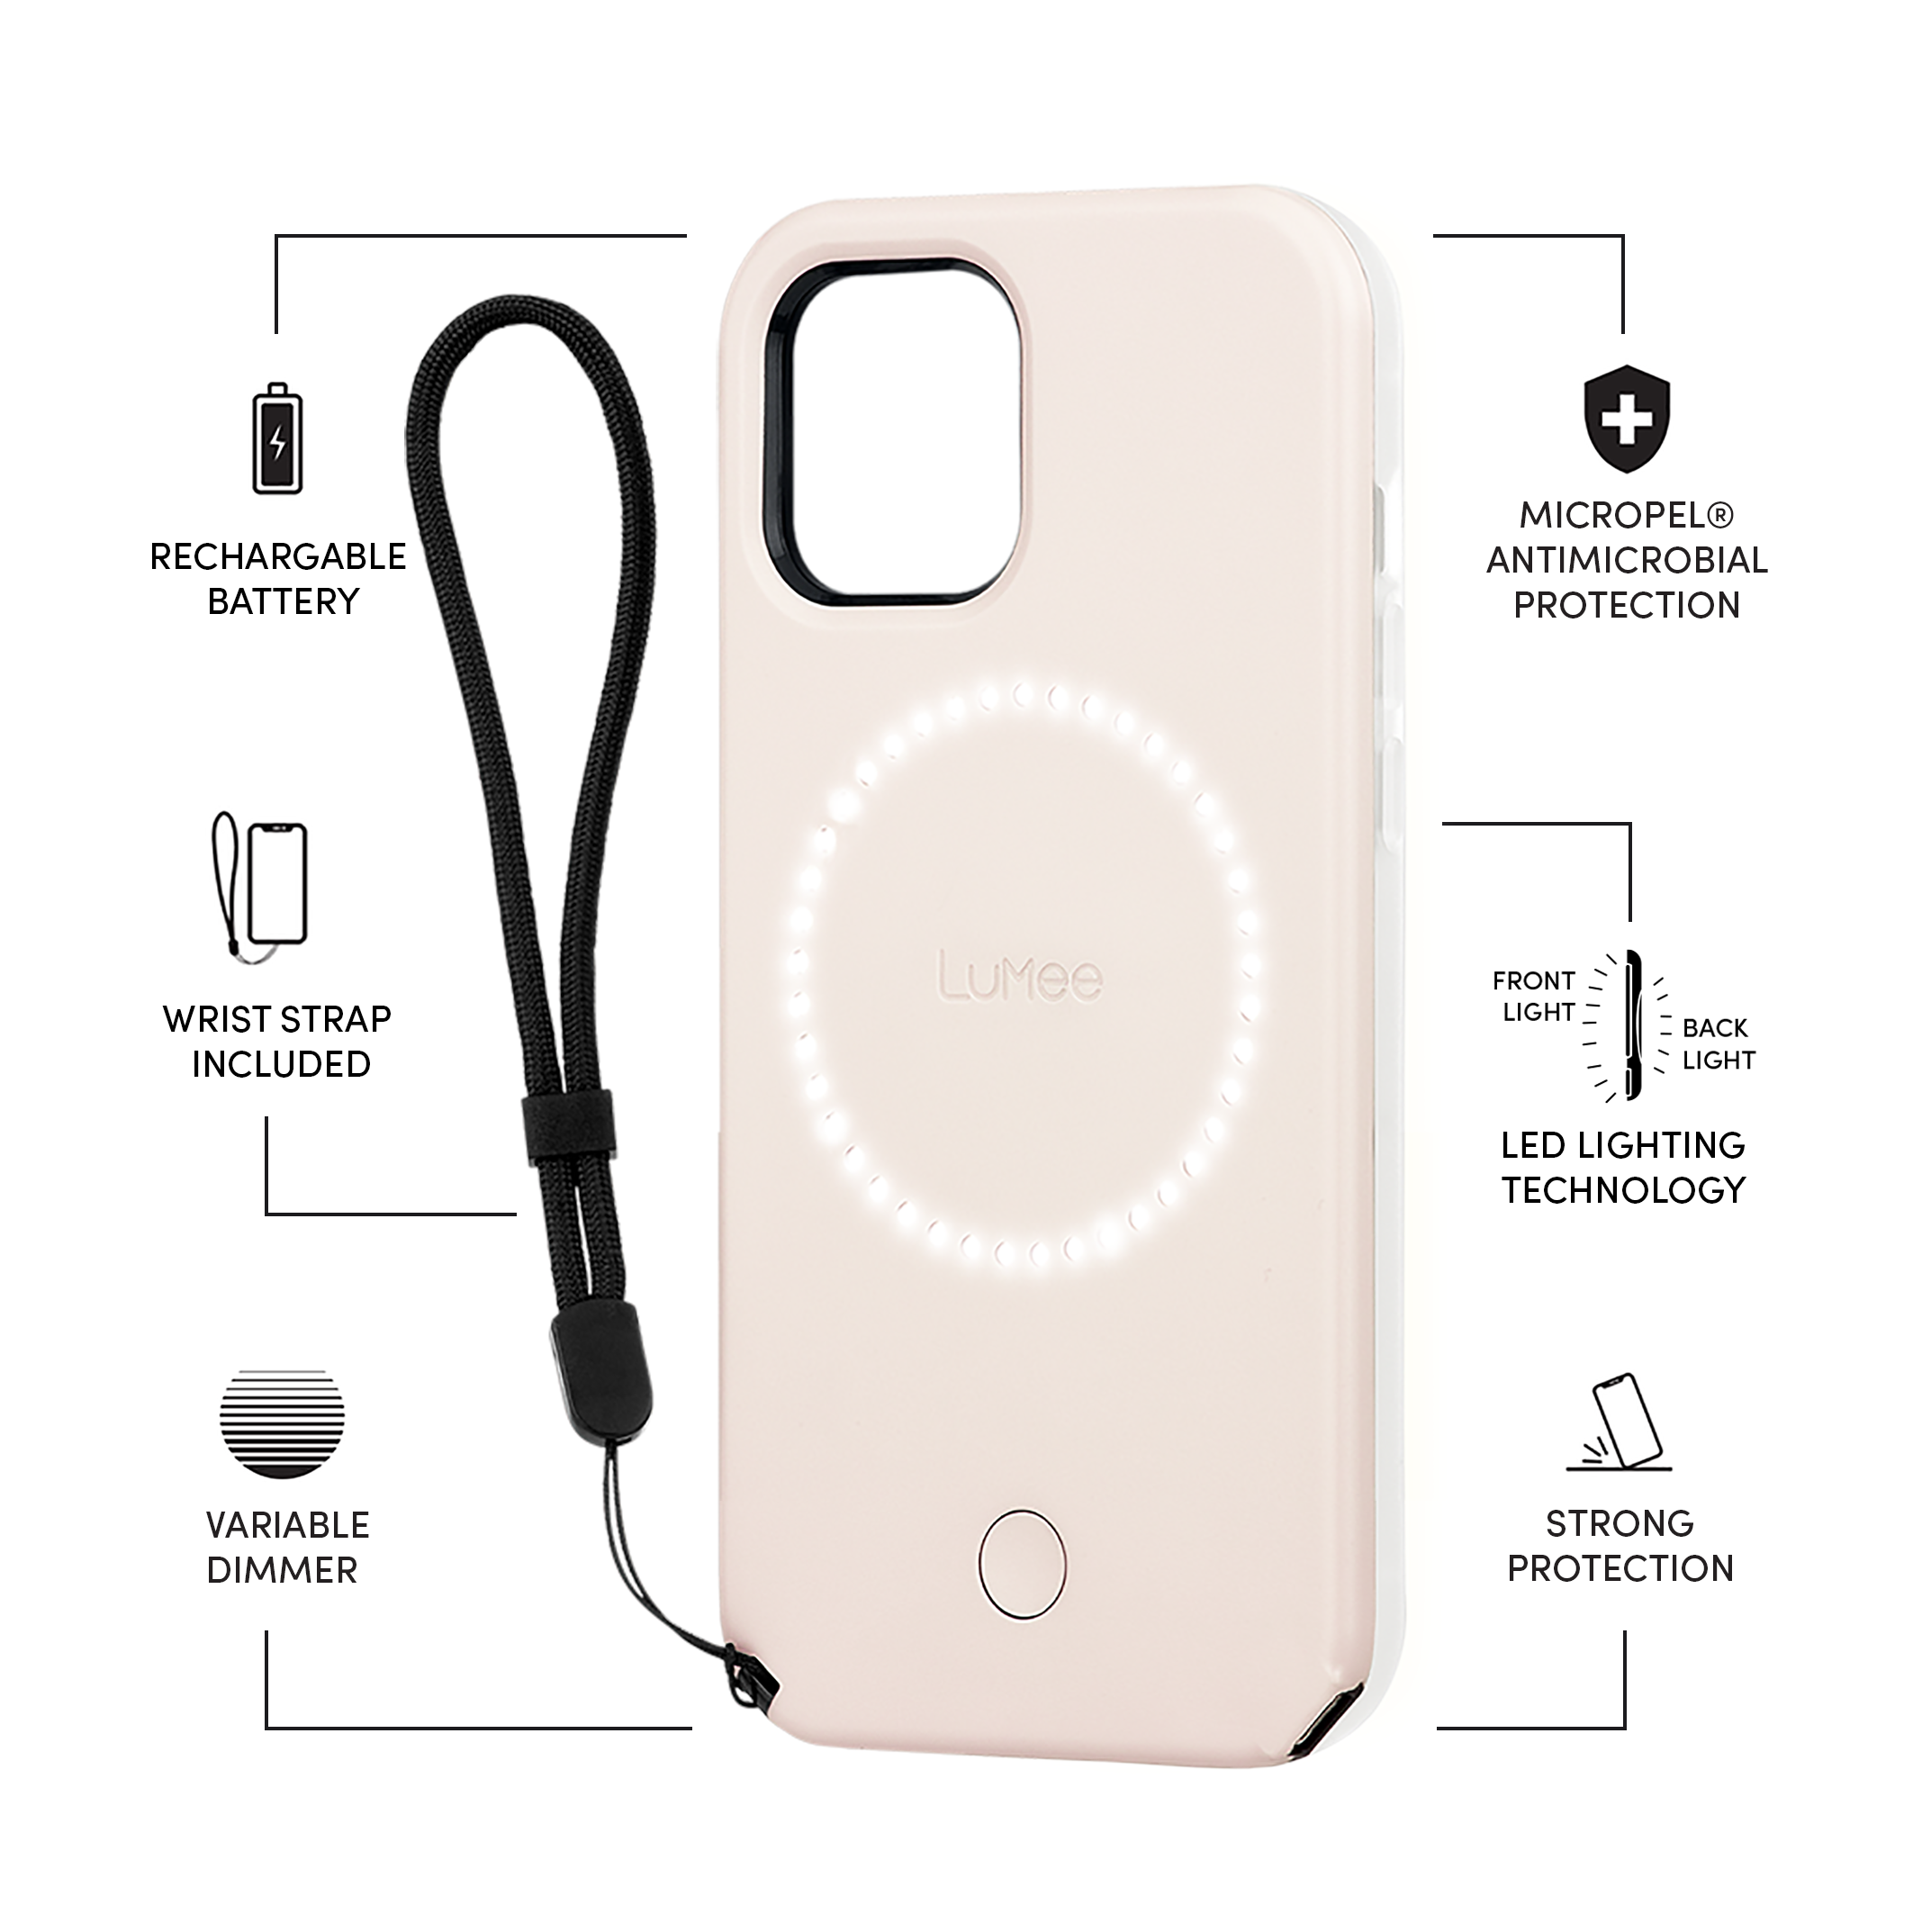 Lumee Halo Selfie Case for Apple iPhone 12 Mini - Studio-Like Front & Back Light w/ Variable Dimmer & Micropel AntiBacterial Protection Wireless Pass-Through Charging - Millenial Pink